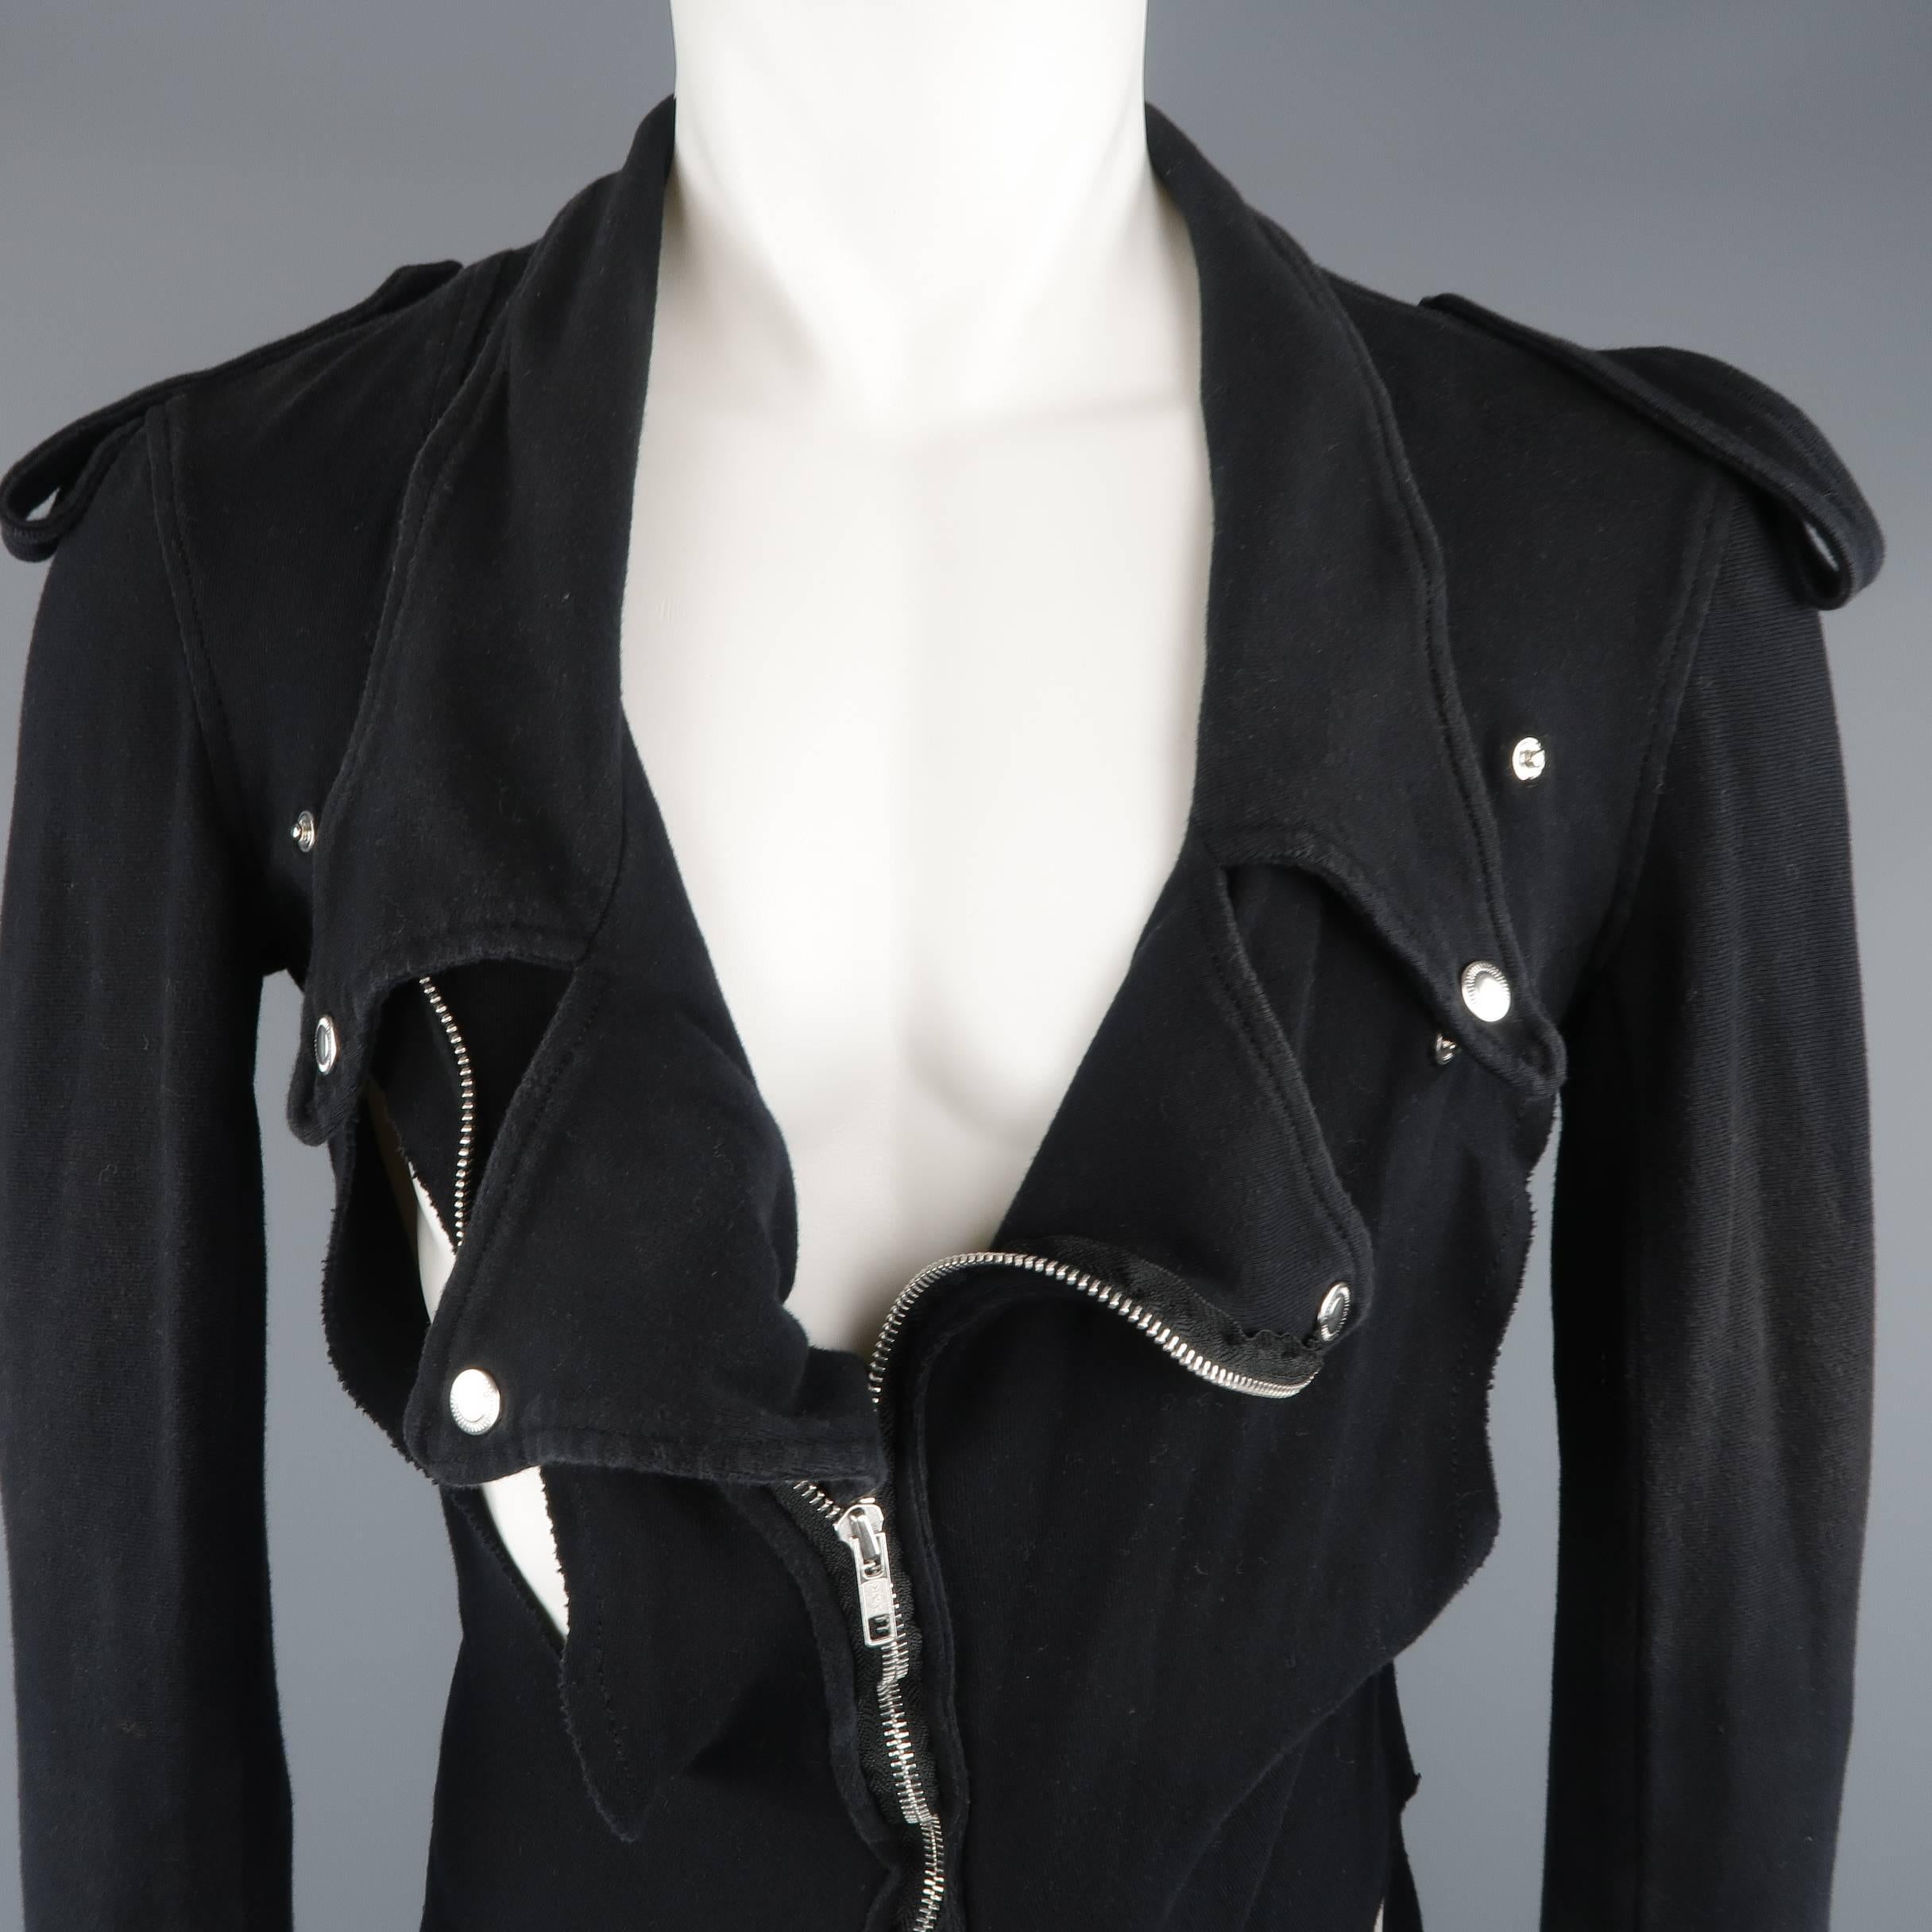 UNDERCOVER avant garde biker jacket comes in black cotton twill and features a pinted lapel with snaps, asymmetrical zip closure, epaulets, shredded cutouts, and bondage strap sides. Wear throughout. As-is. Made in Japan.
 
Fair Pre-Owned